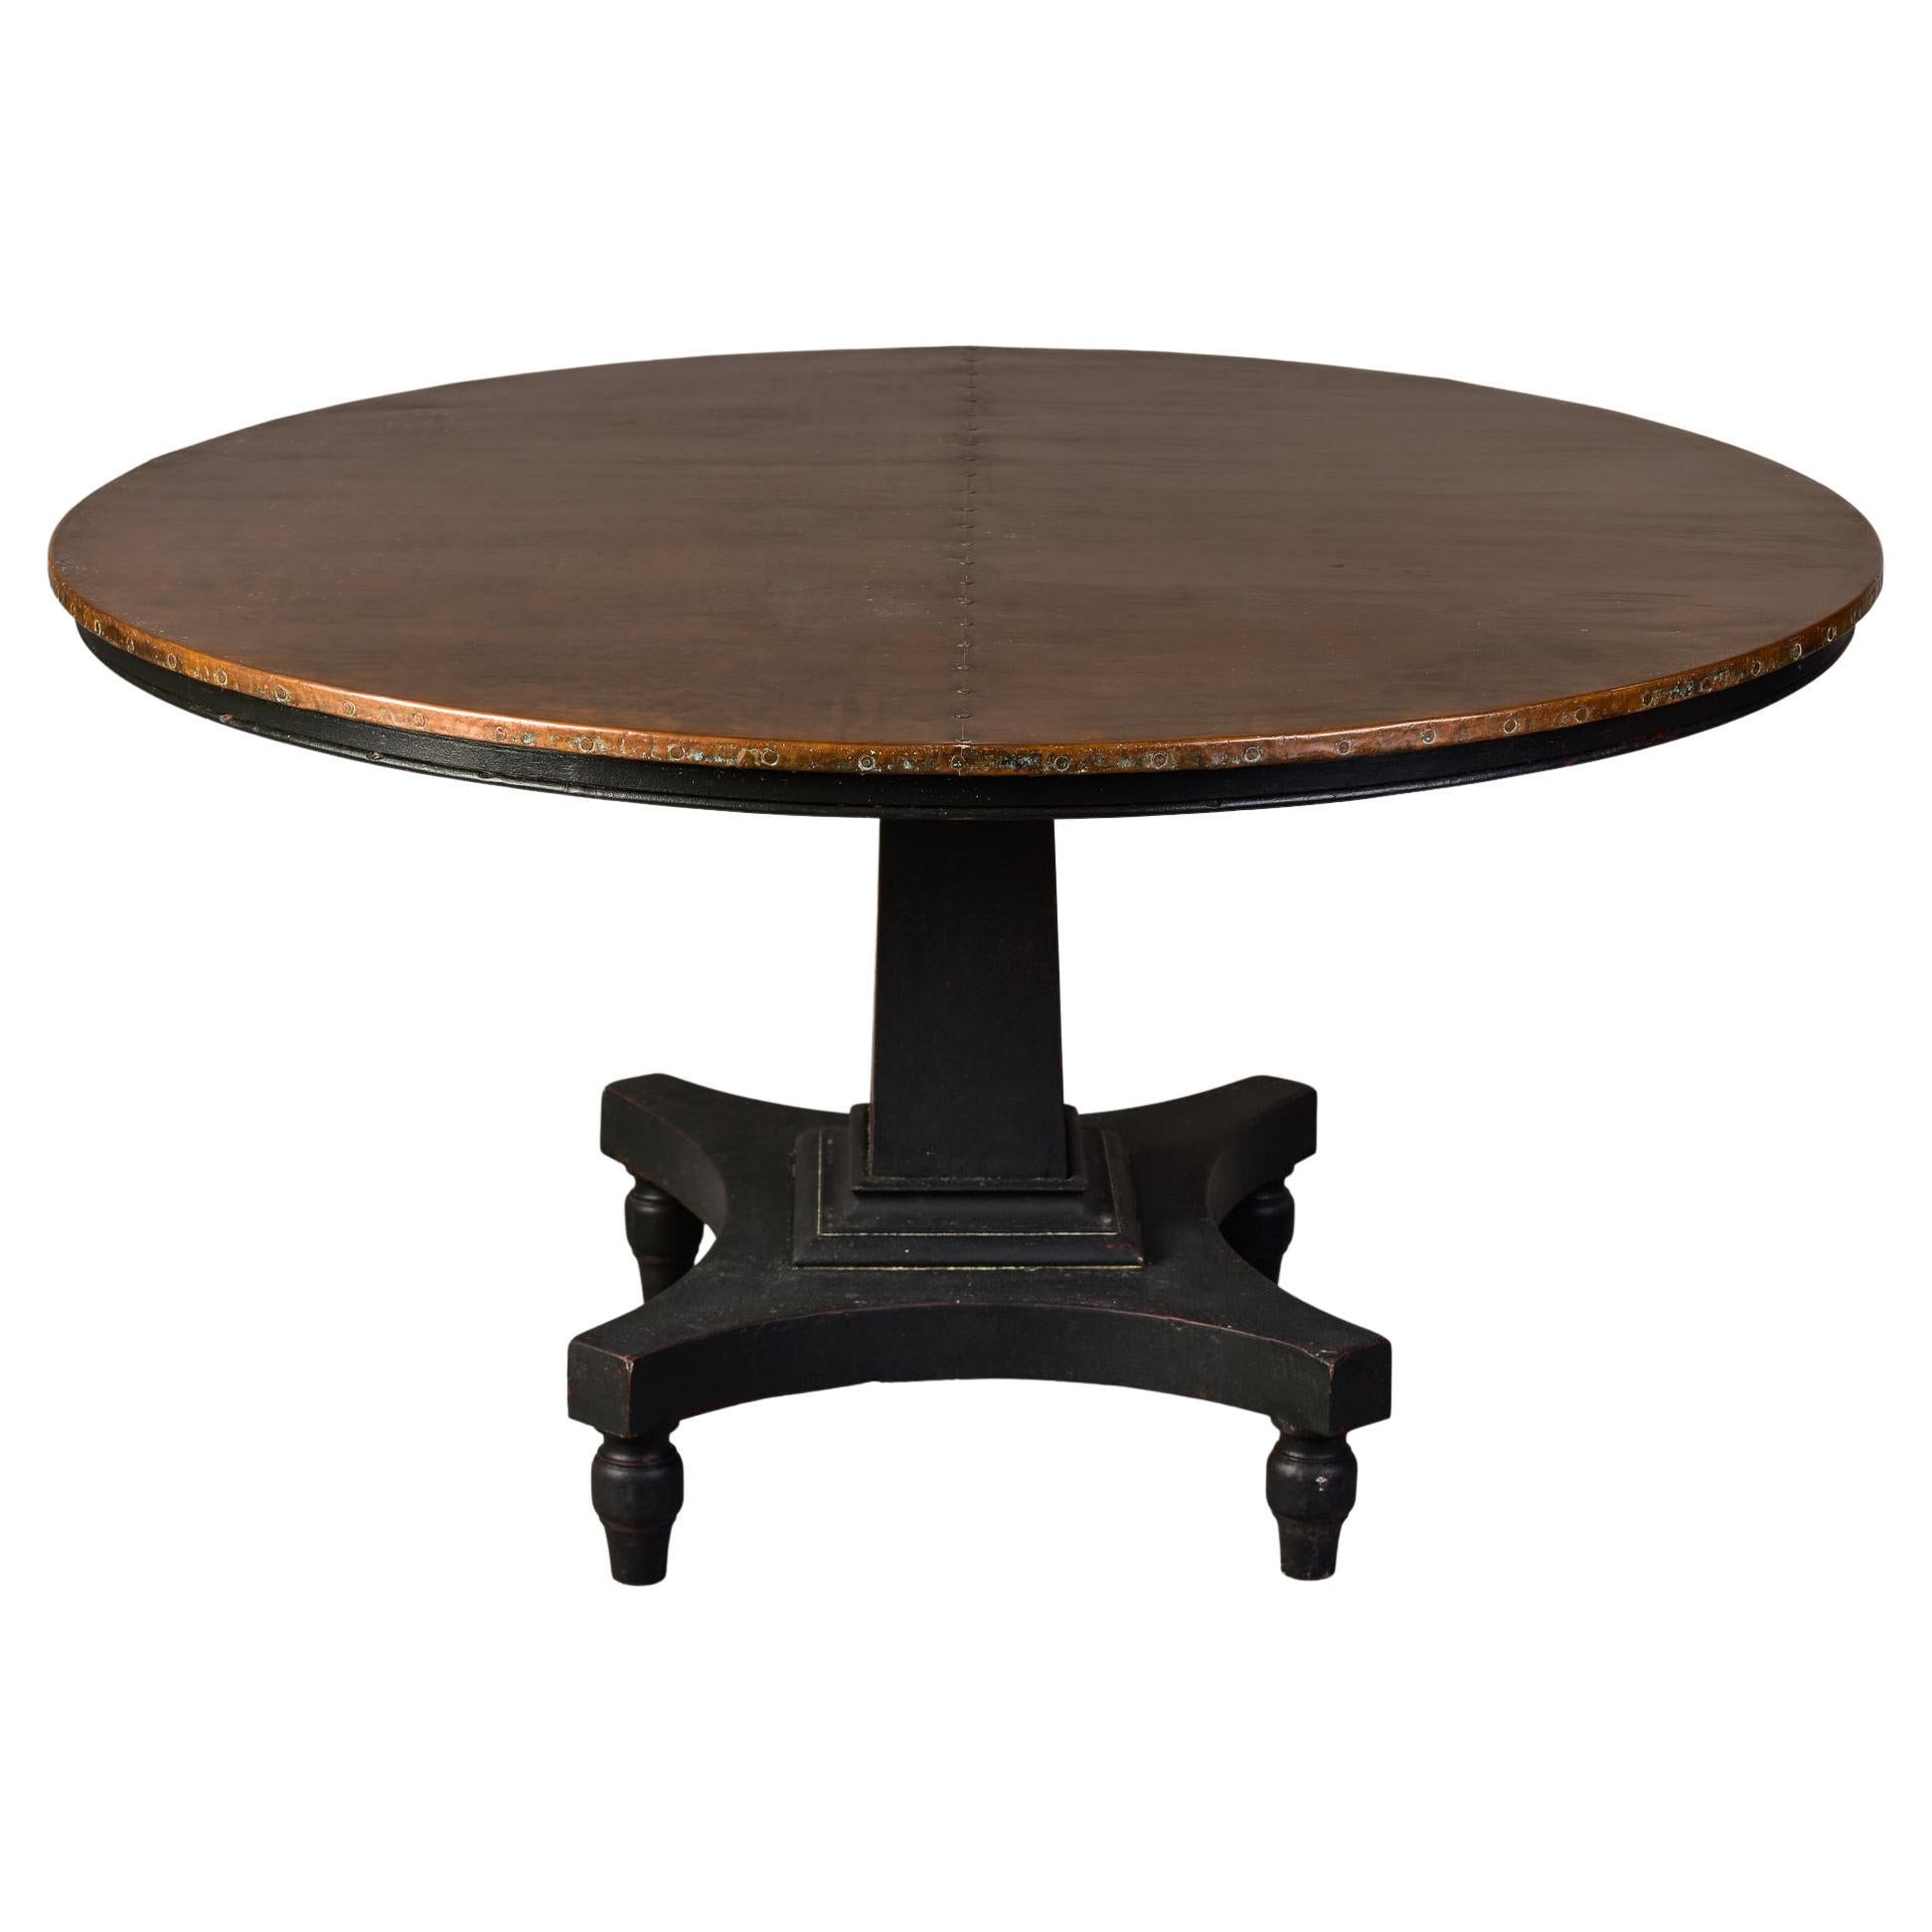 English Mahogany Table Painted Black With New Copper Top For Sale